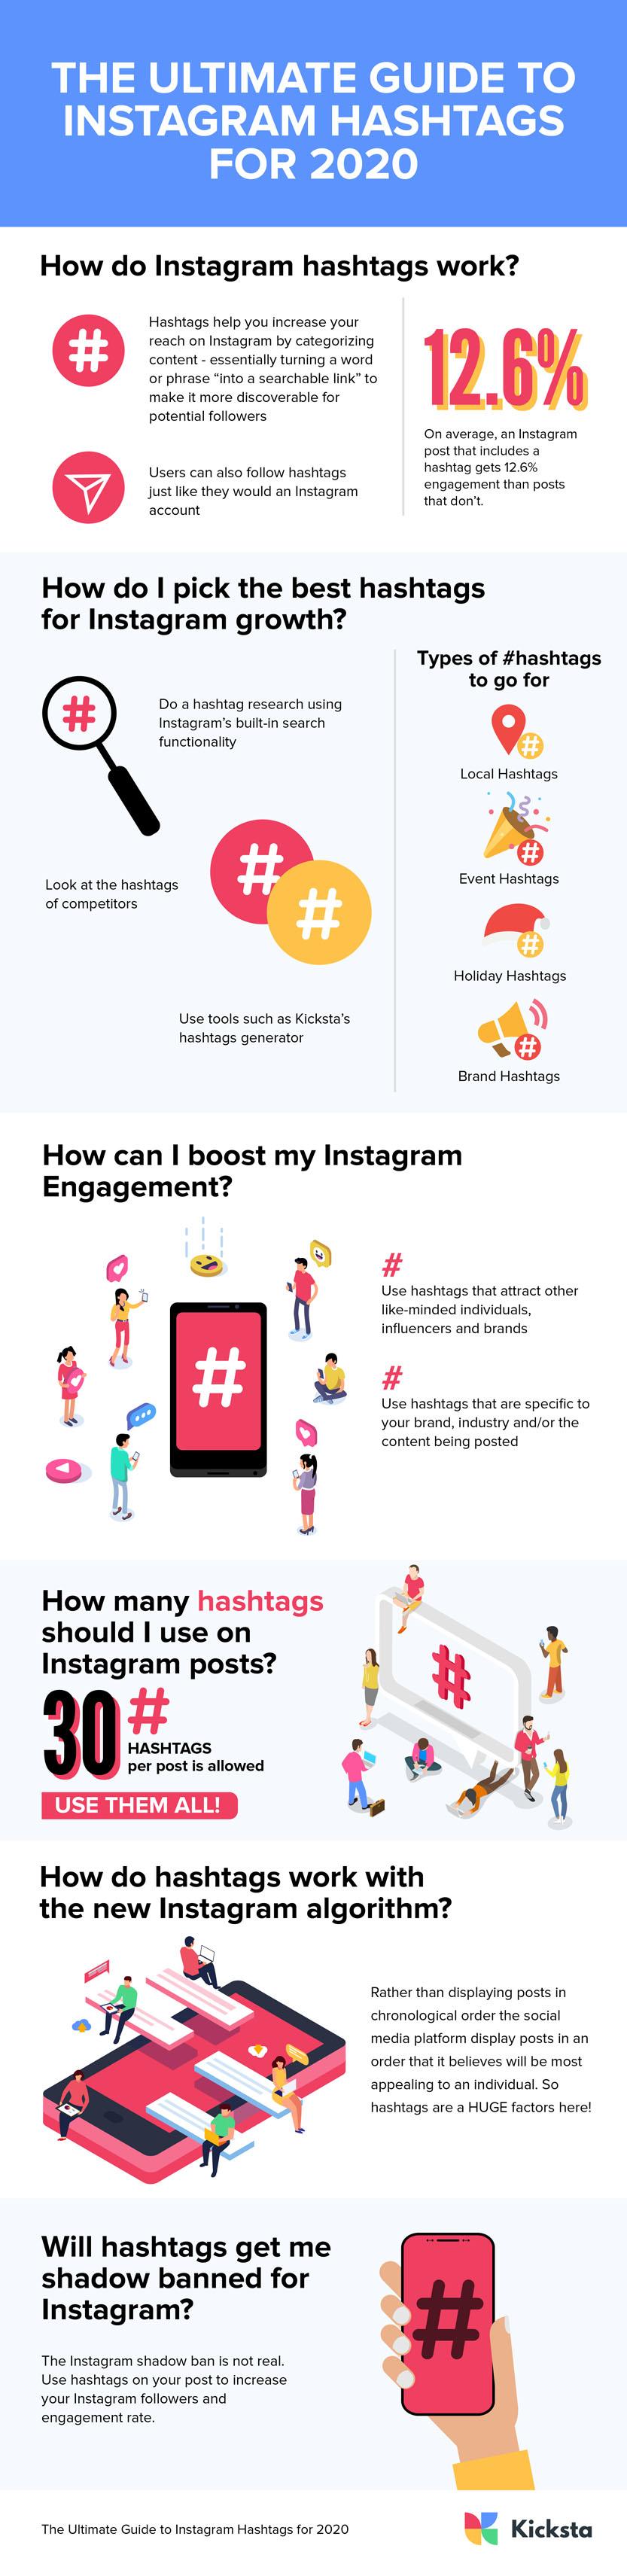 The Ultimate Guide To Finding The Best Hashtags For Instagram 5730